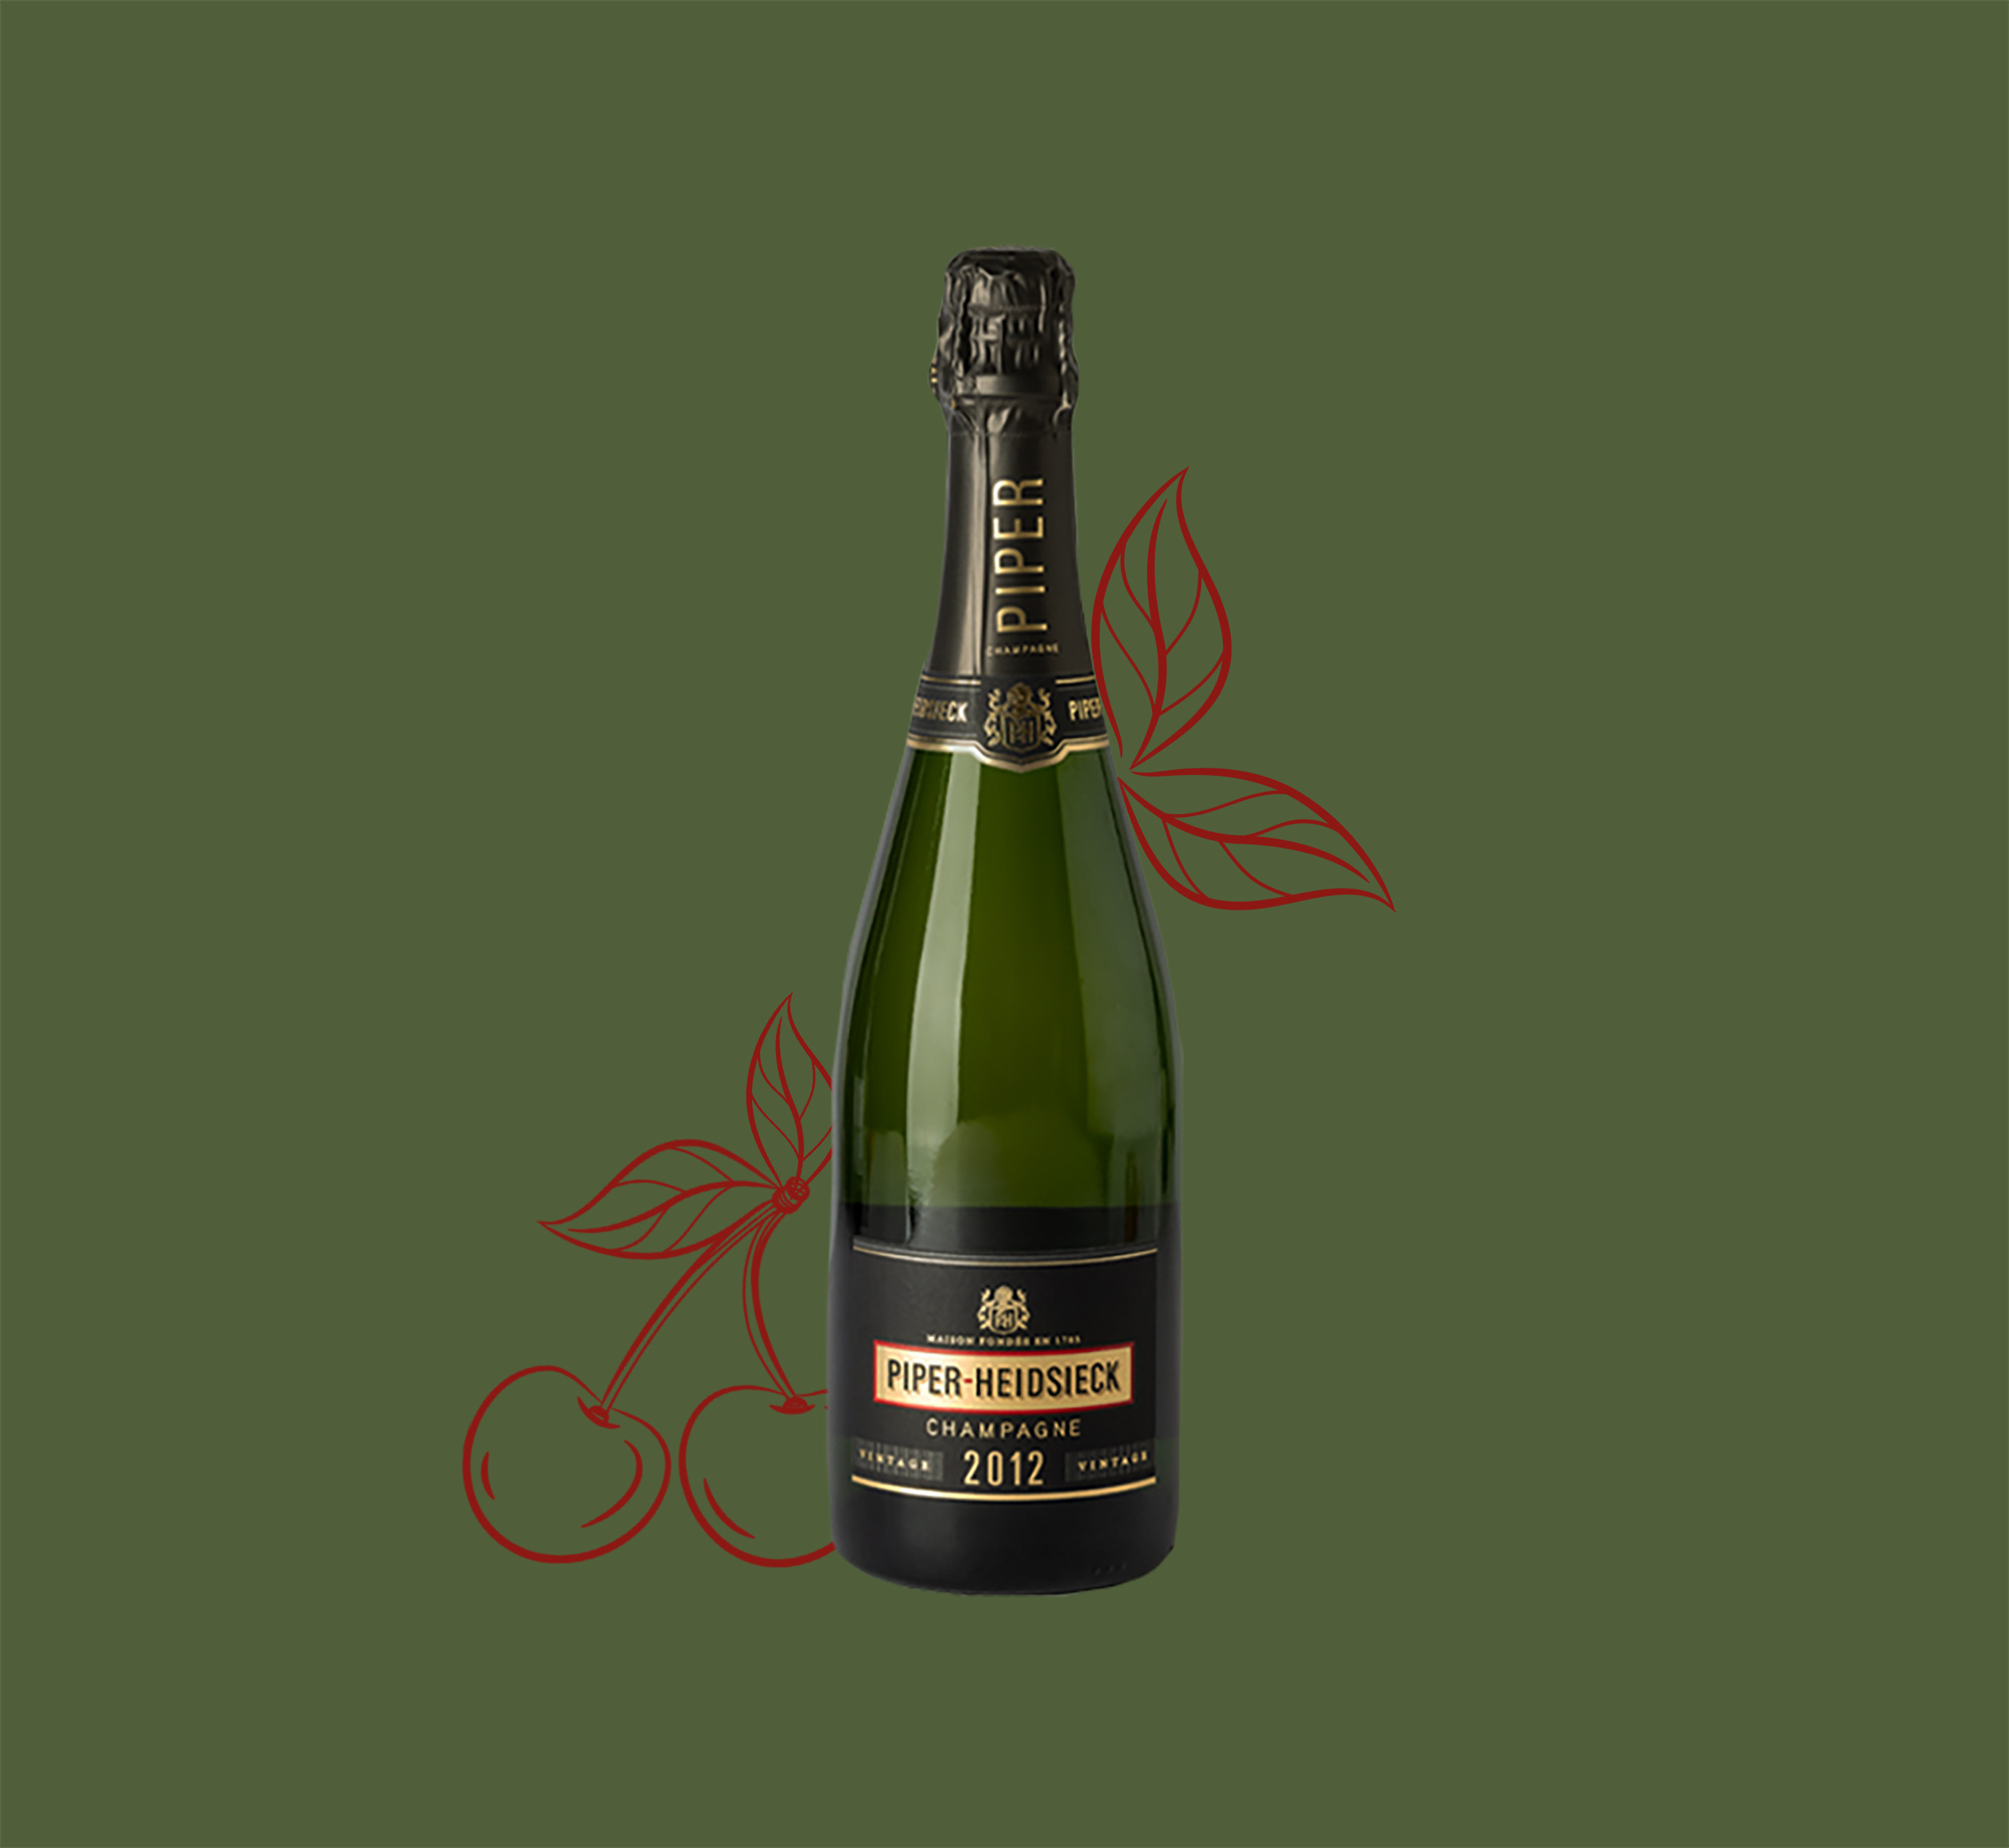 Champagne Brut Vintage 2012 with green background and illustrated red cherries and leaves